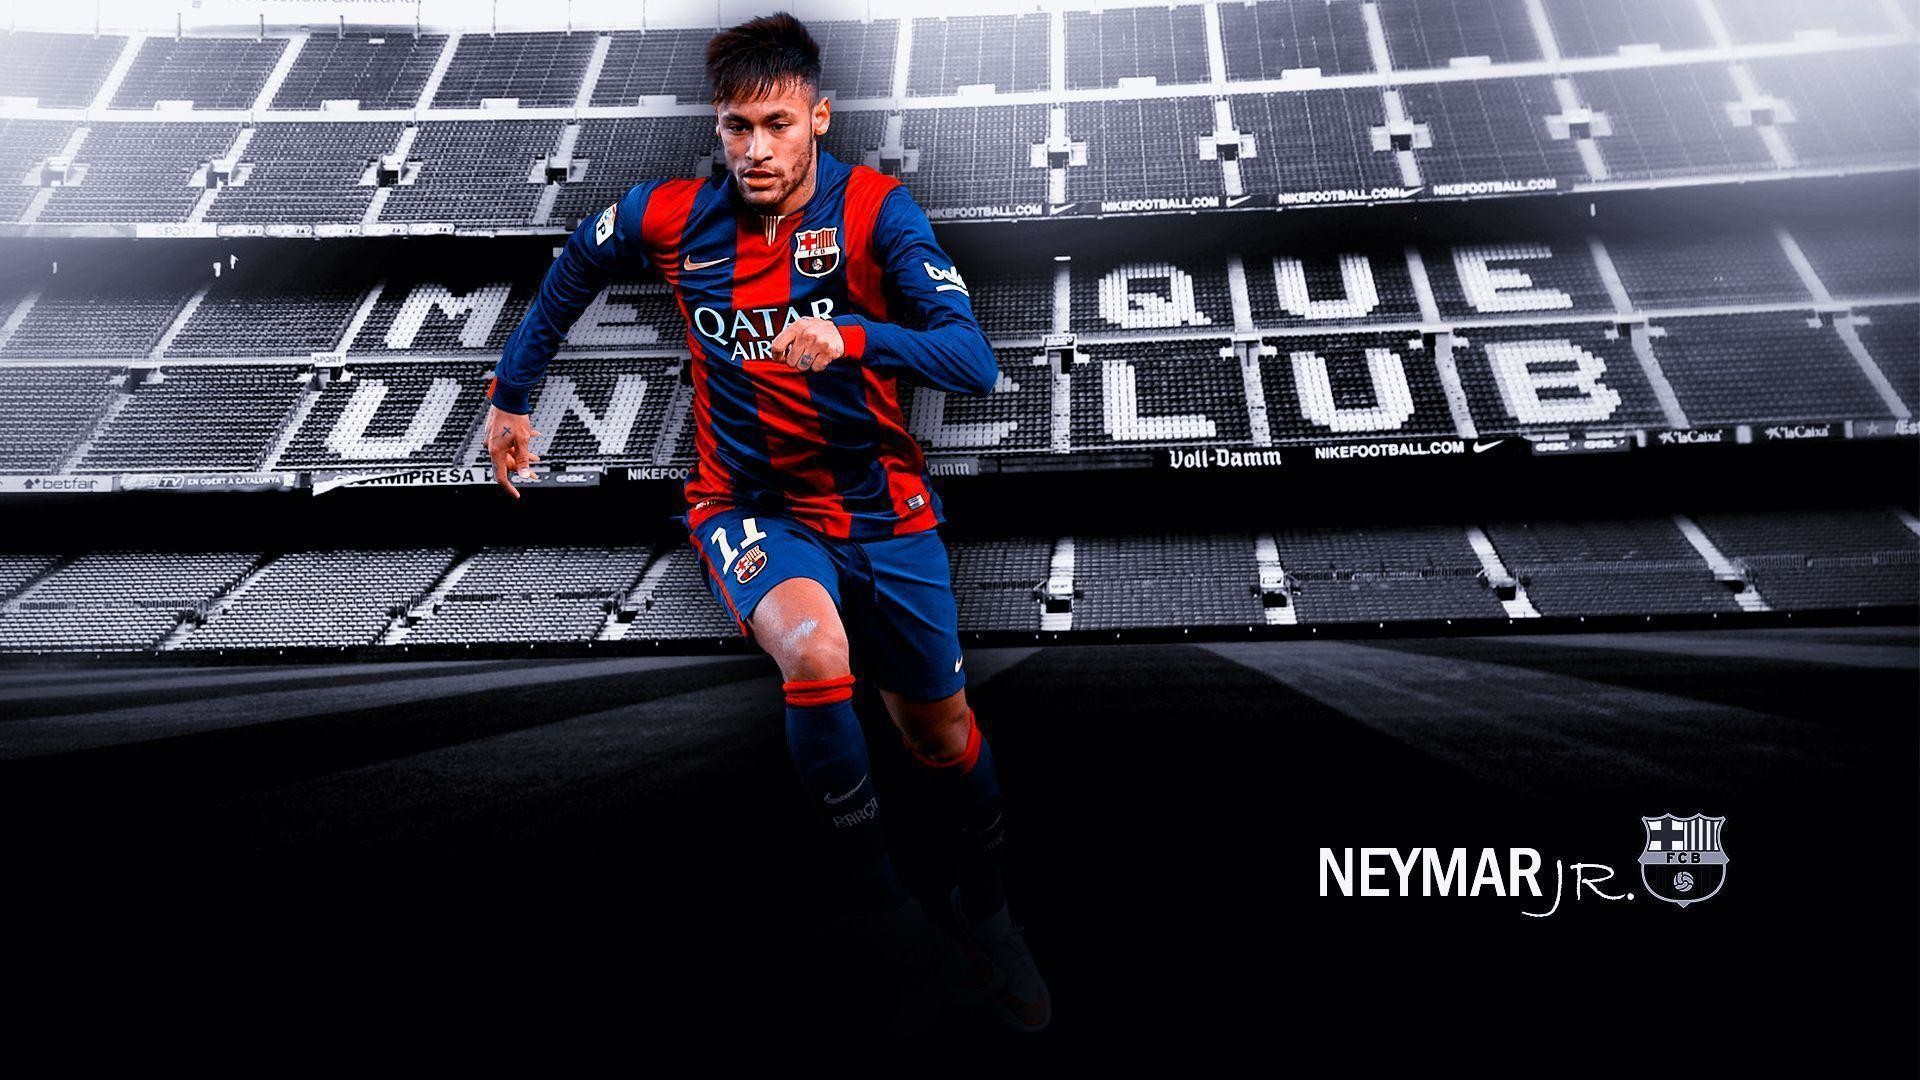 1920x1080 Neymar 2016 Wallpaper HD - HD Wallpapers Backgrounds of Your Choice